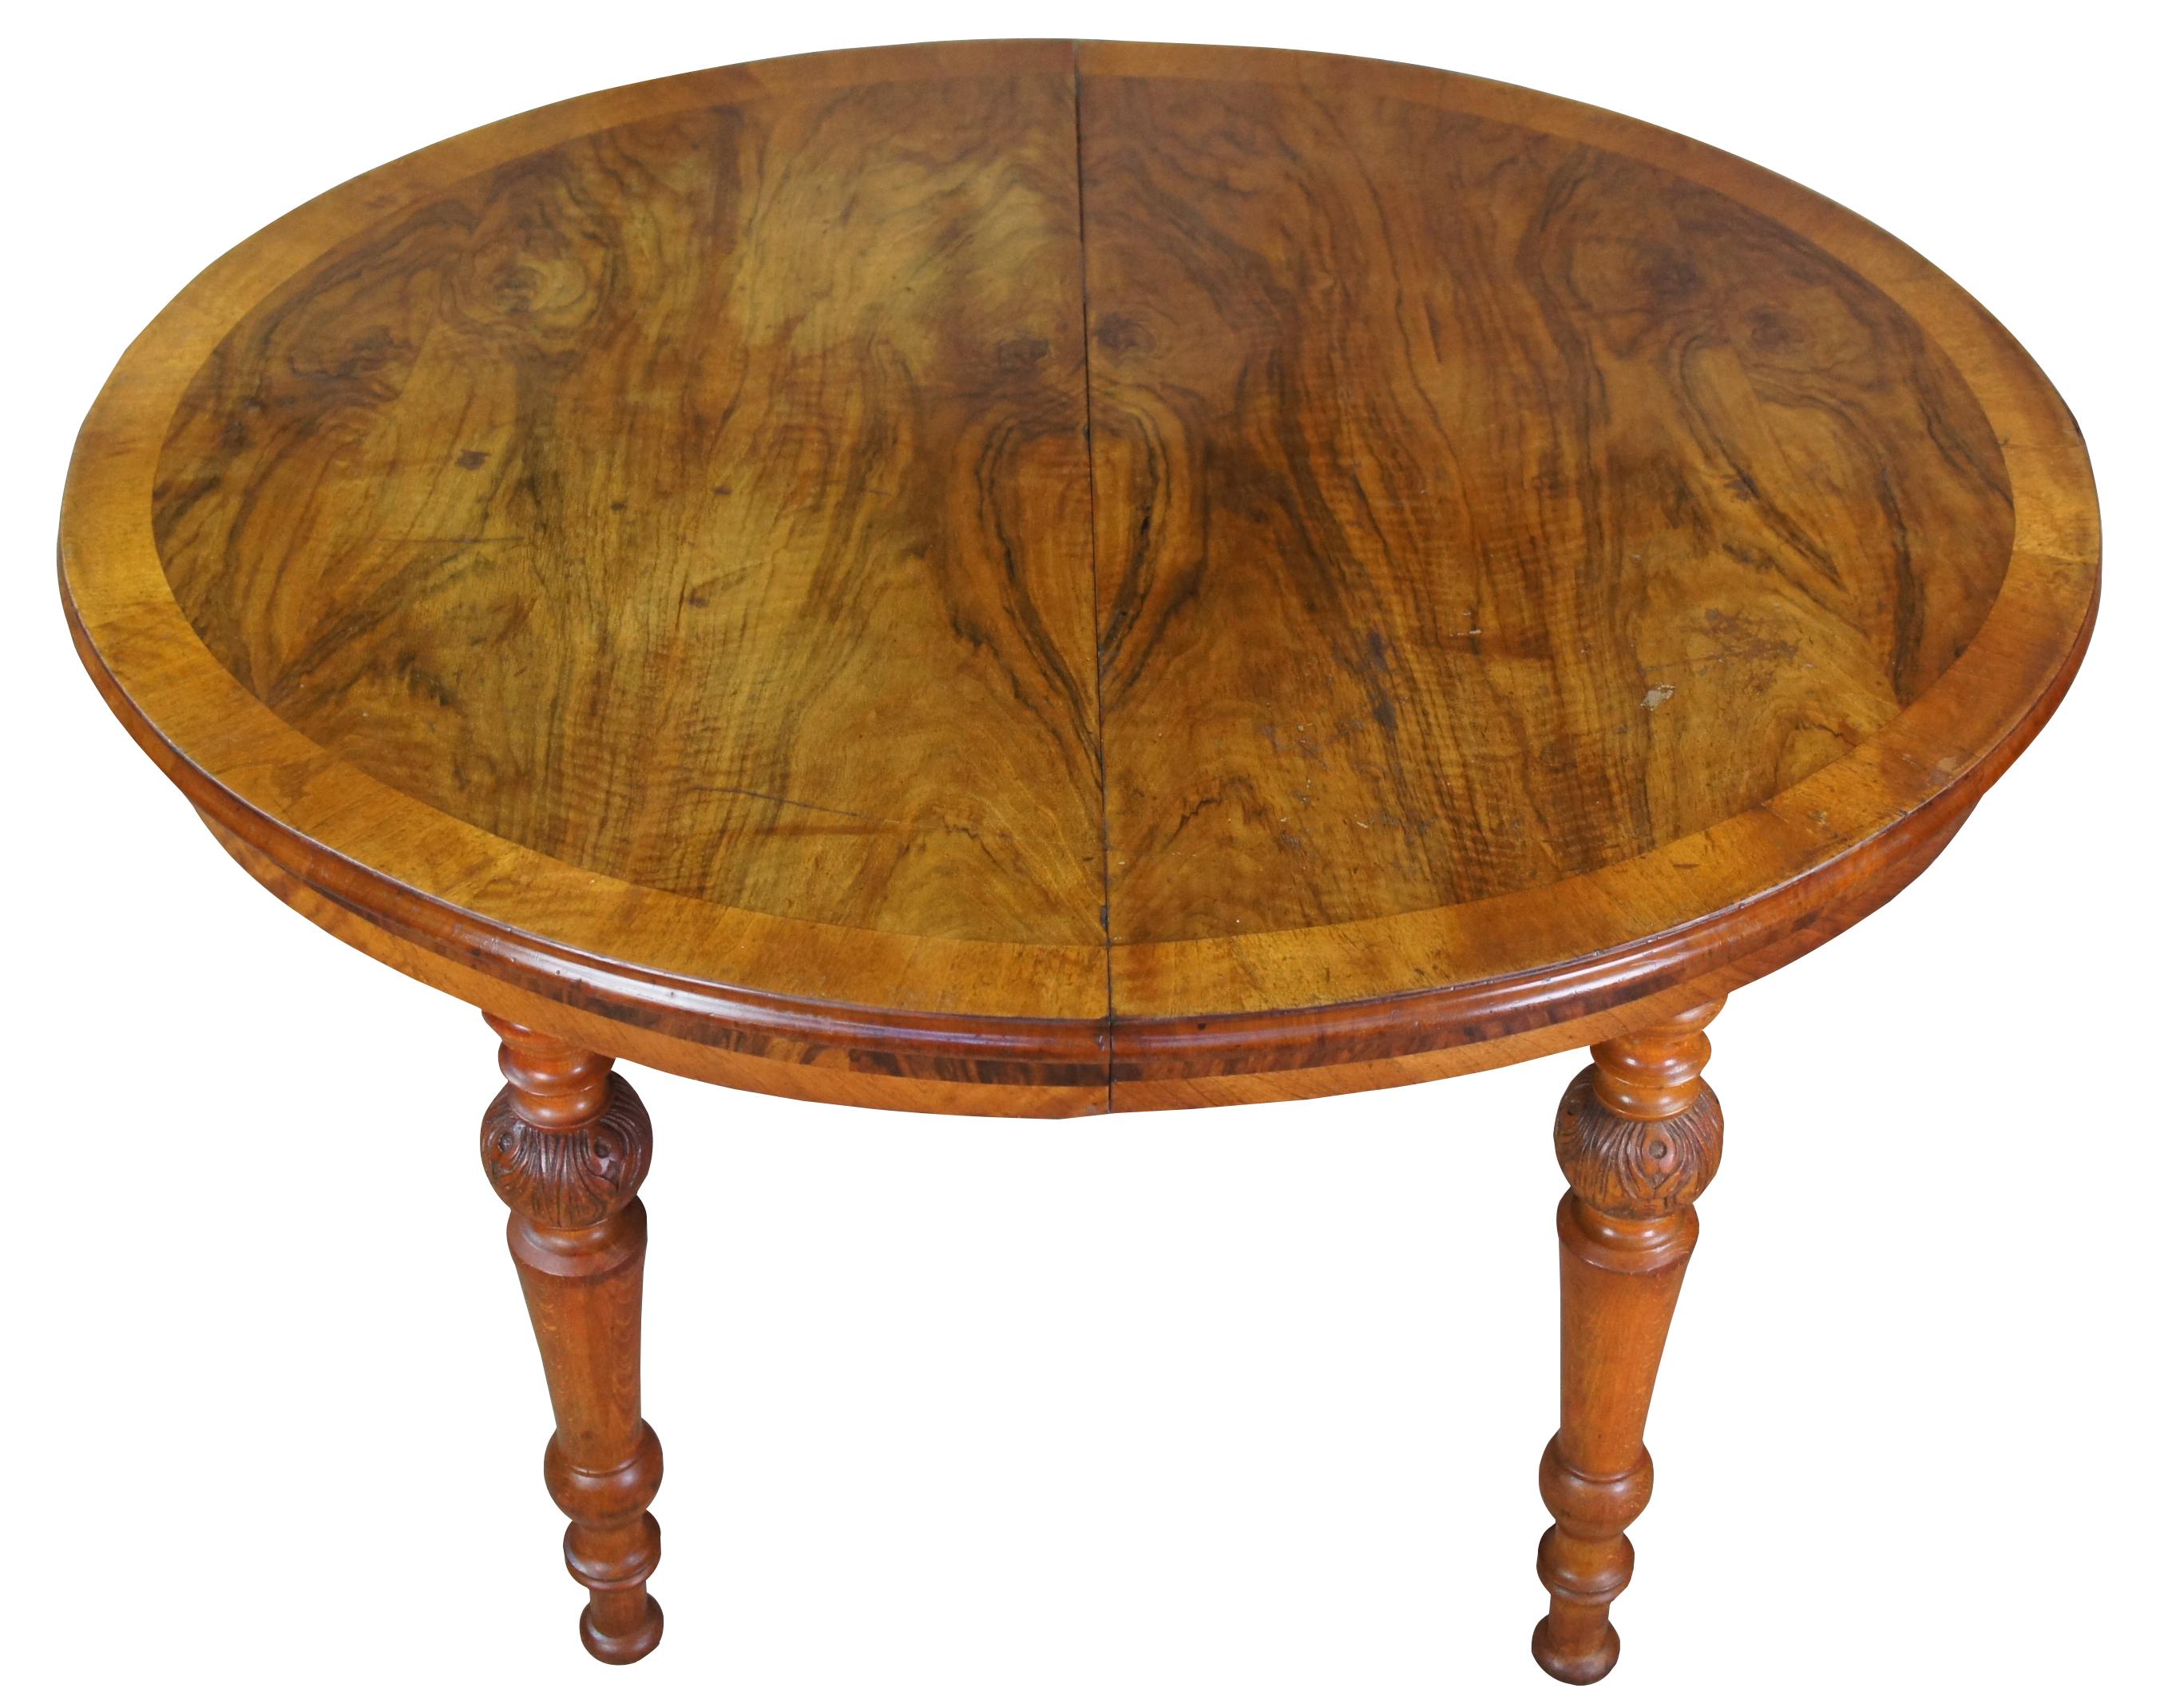 Antique Victorian dining or breakfast table. Made of Crotch Walnut featuring ovular or rounded form with circular banding and carved turn legs with castors. Measure: 48